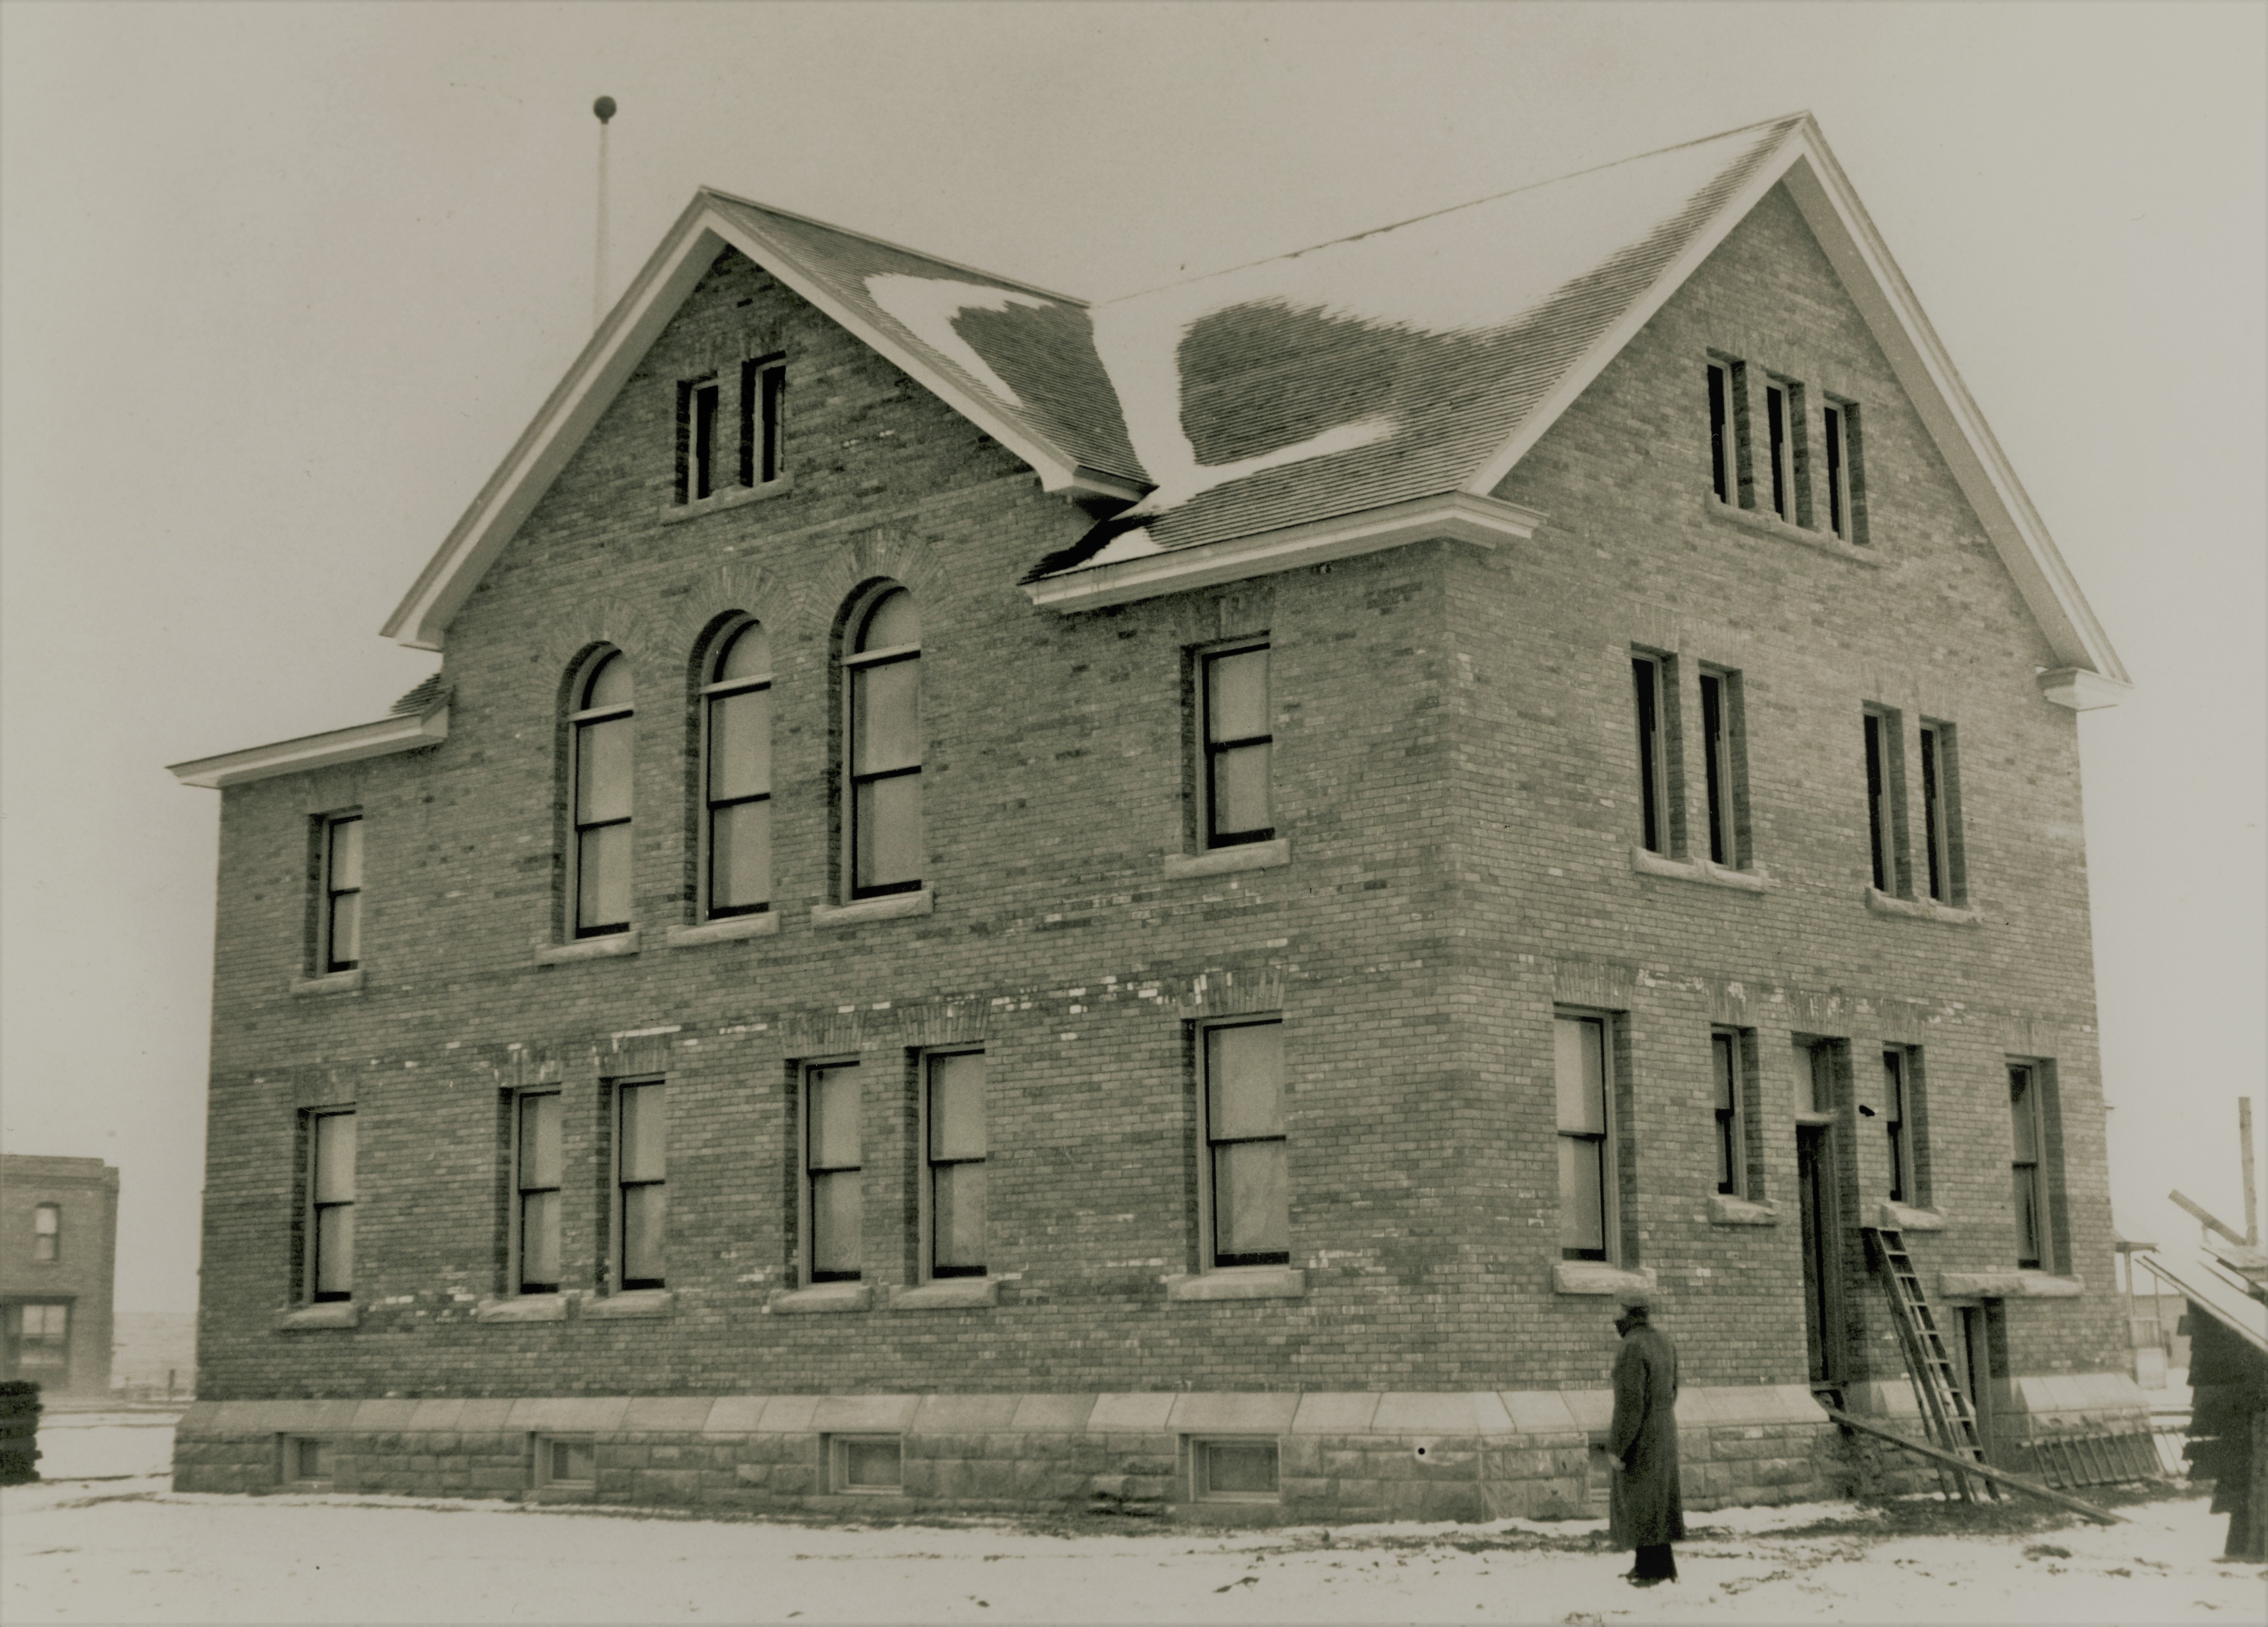 EARLY JUSTICE - Red Deer’s first court house on the southwest corner of Ross Street and MacKenzie (49) Ave.